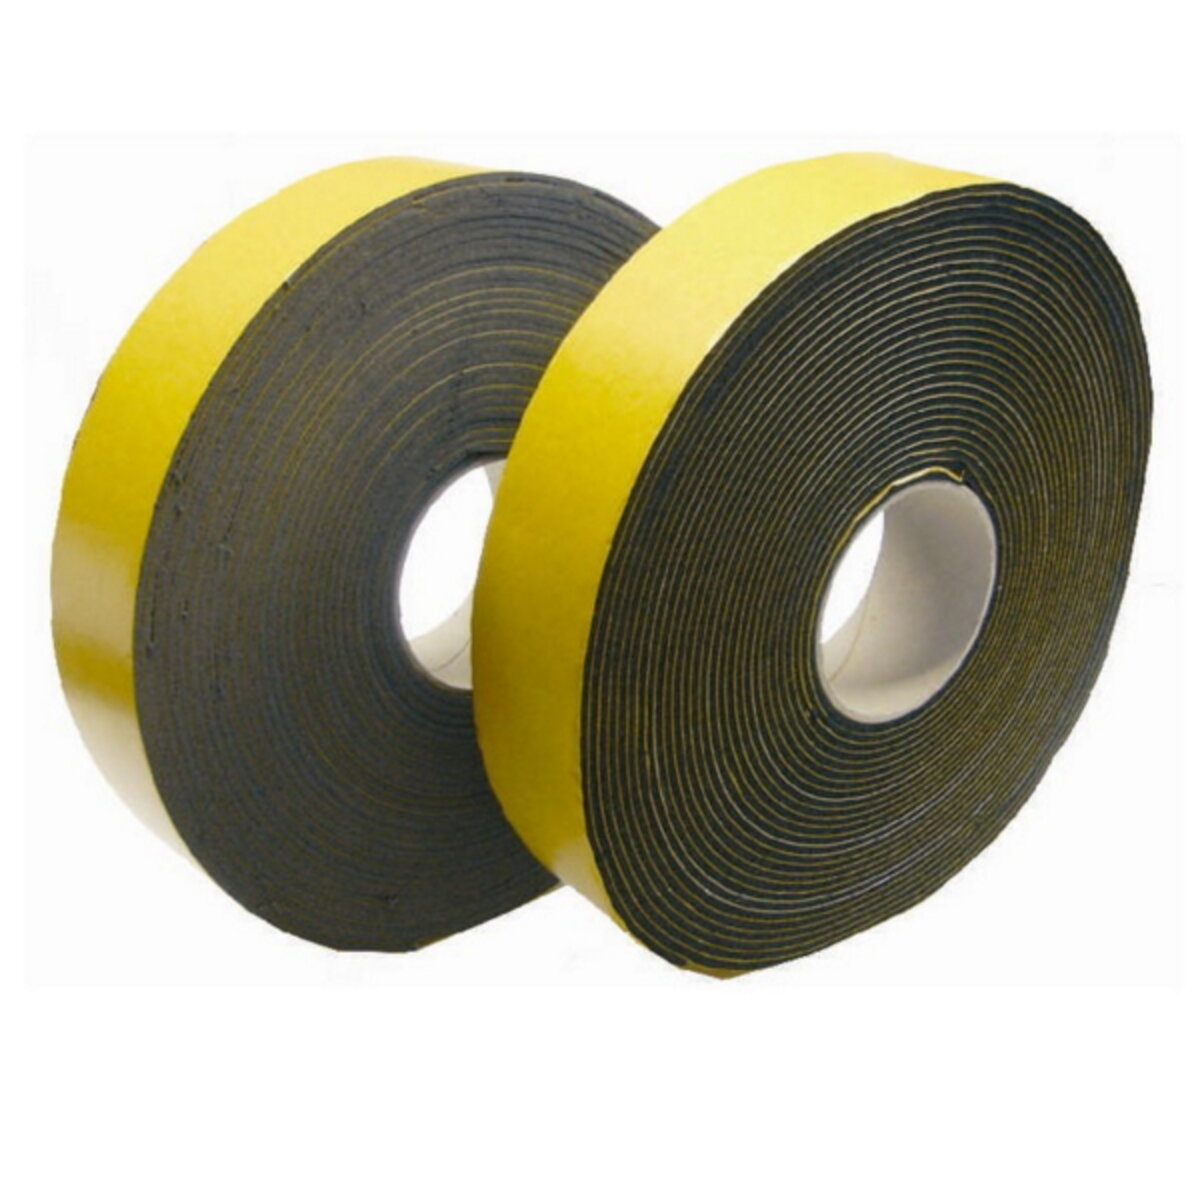 Self-adhesive elastomeric insulating band anti-condensation tape for air conditioners